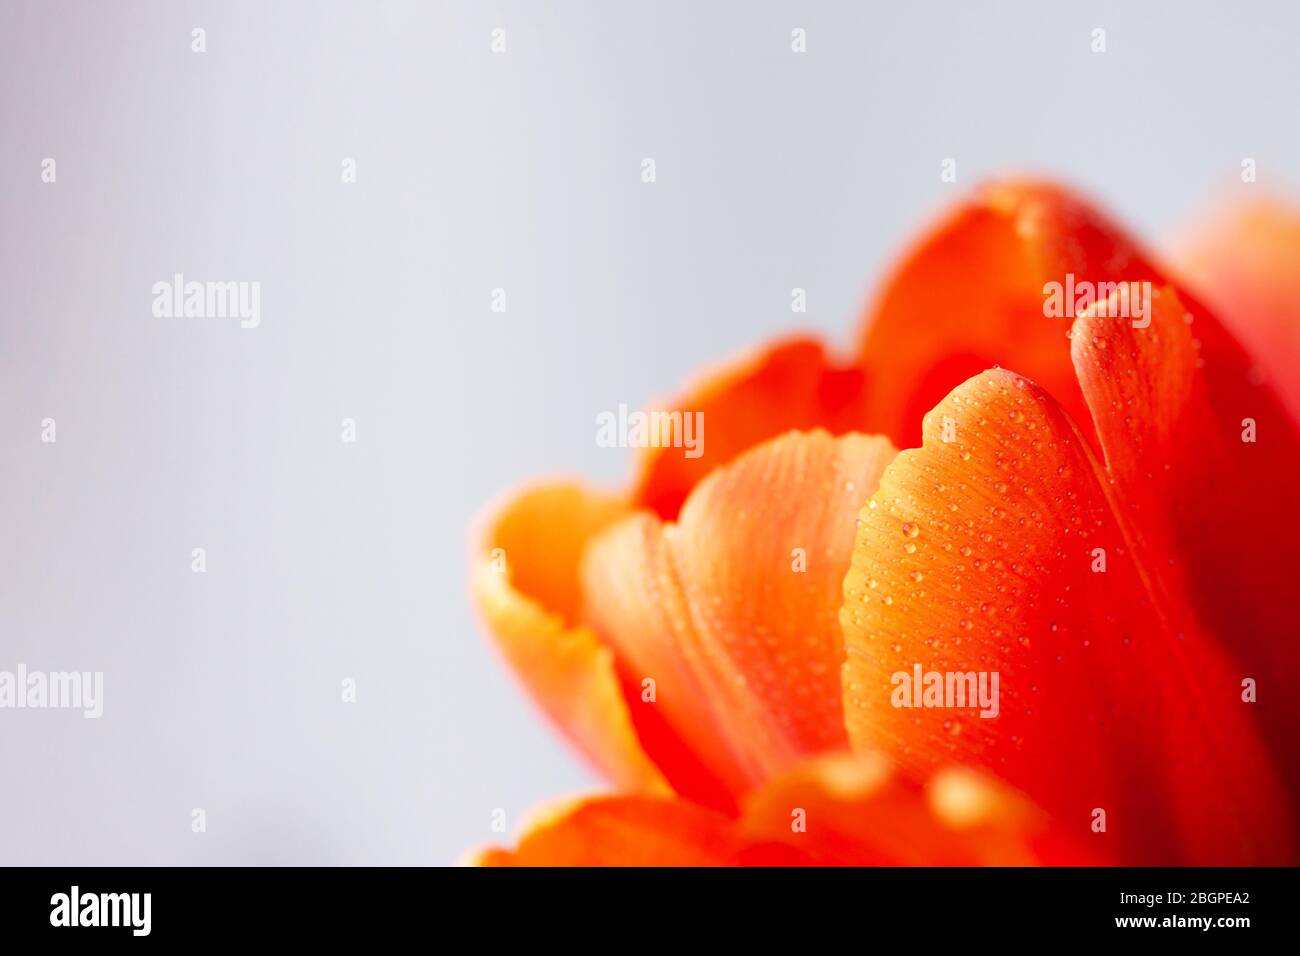 Tulip flower close-up. Incredible orange color, natural beauty of details. The concept of spring, femininity, sensuality. Stock Photo